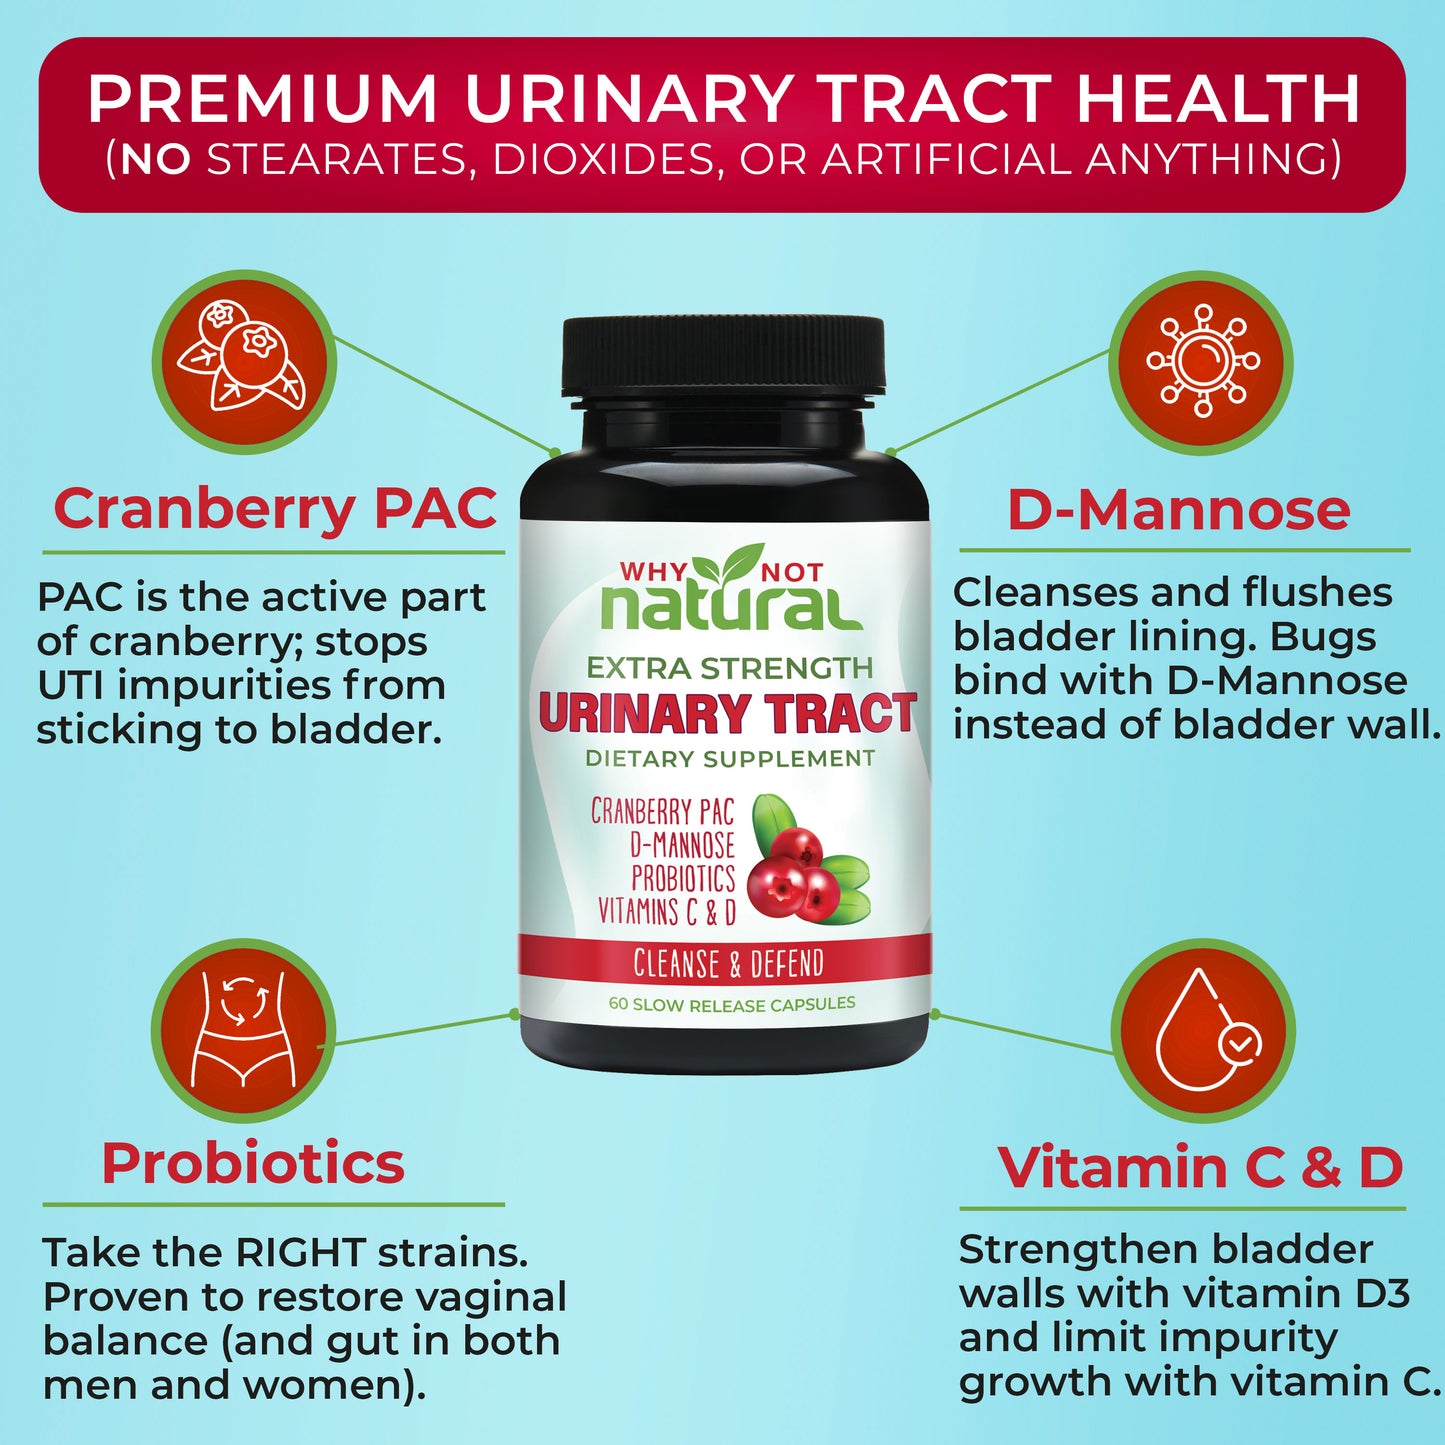 5-in-1 UTI Pills with D Mannose, Cranberry PAC Extract, Probiotics and Vitamin C & D - Urinary Health Formula for Women and Men